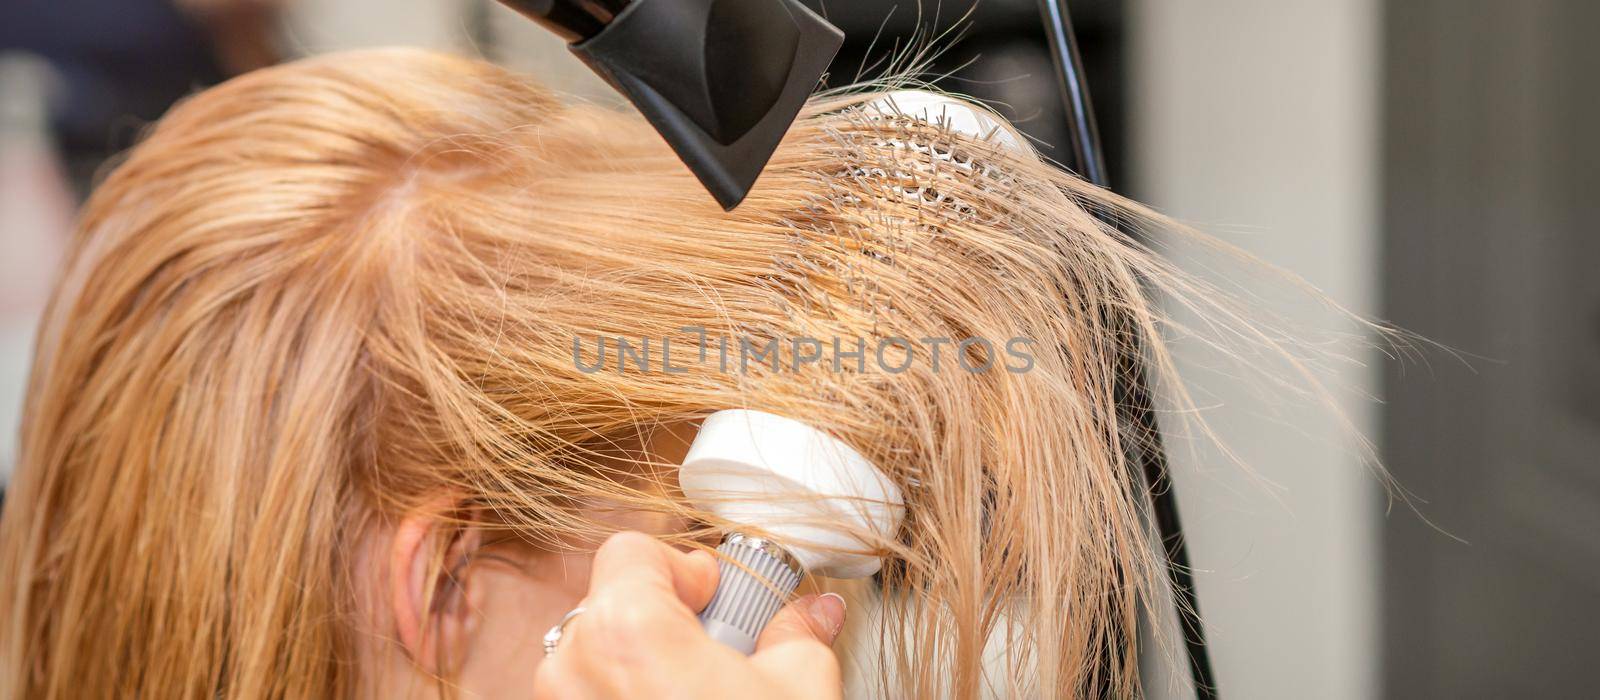 Hairdresser hand drying blond hair with a hairdryer and round brush in a beauty salon